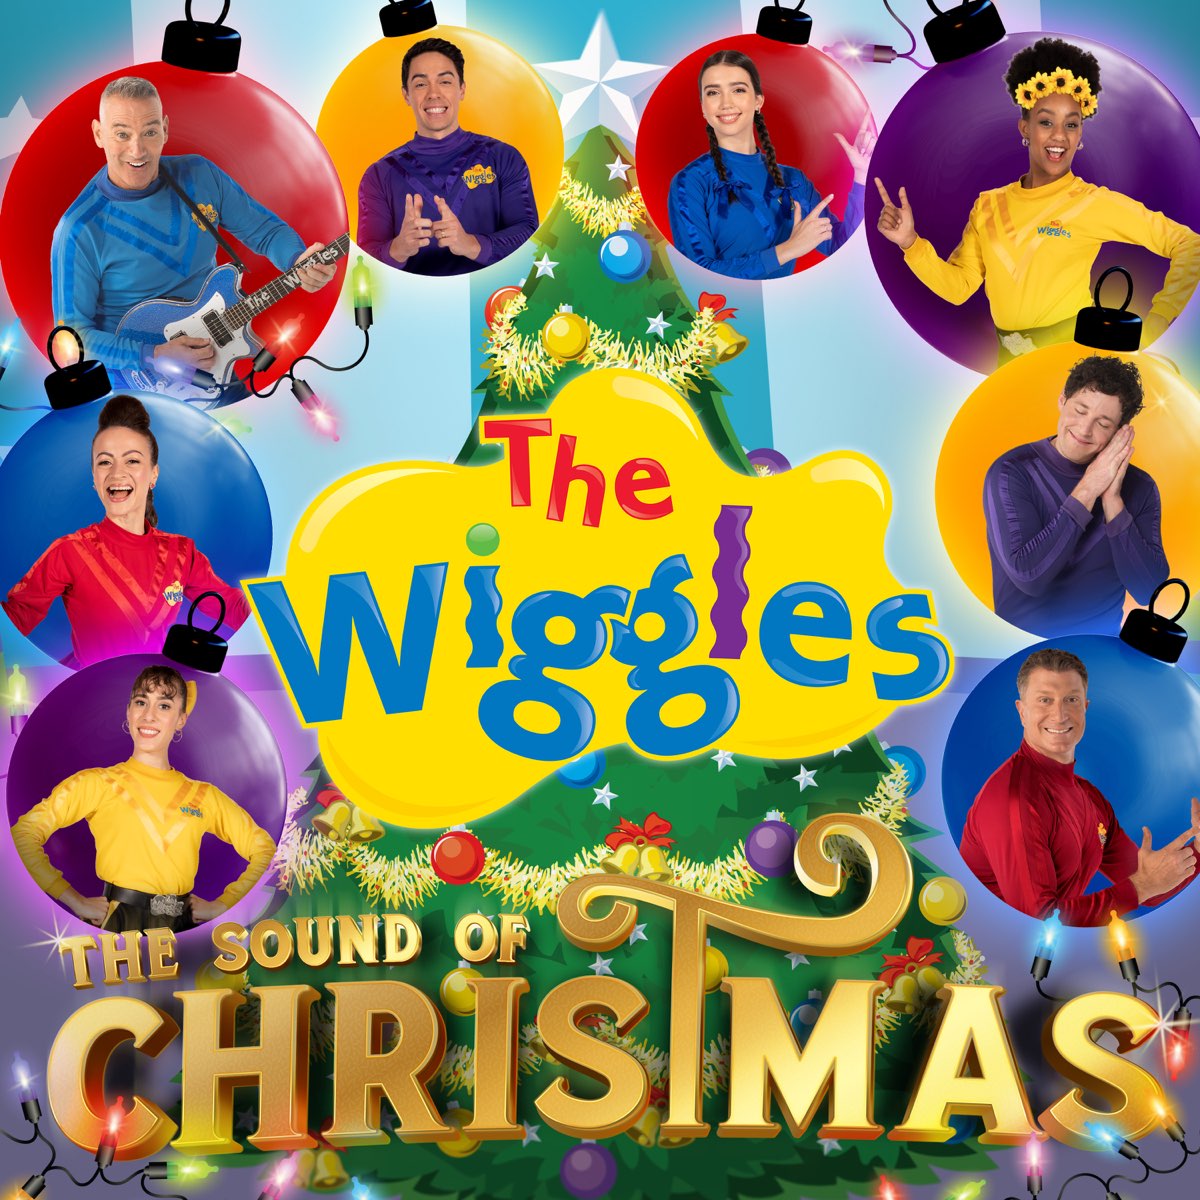 ‎The Sound of Christmas - Album by The Wiggles - Apple Music